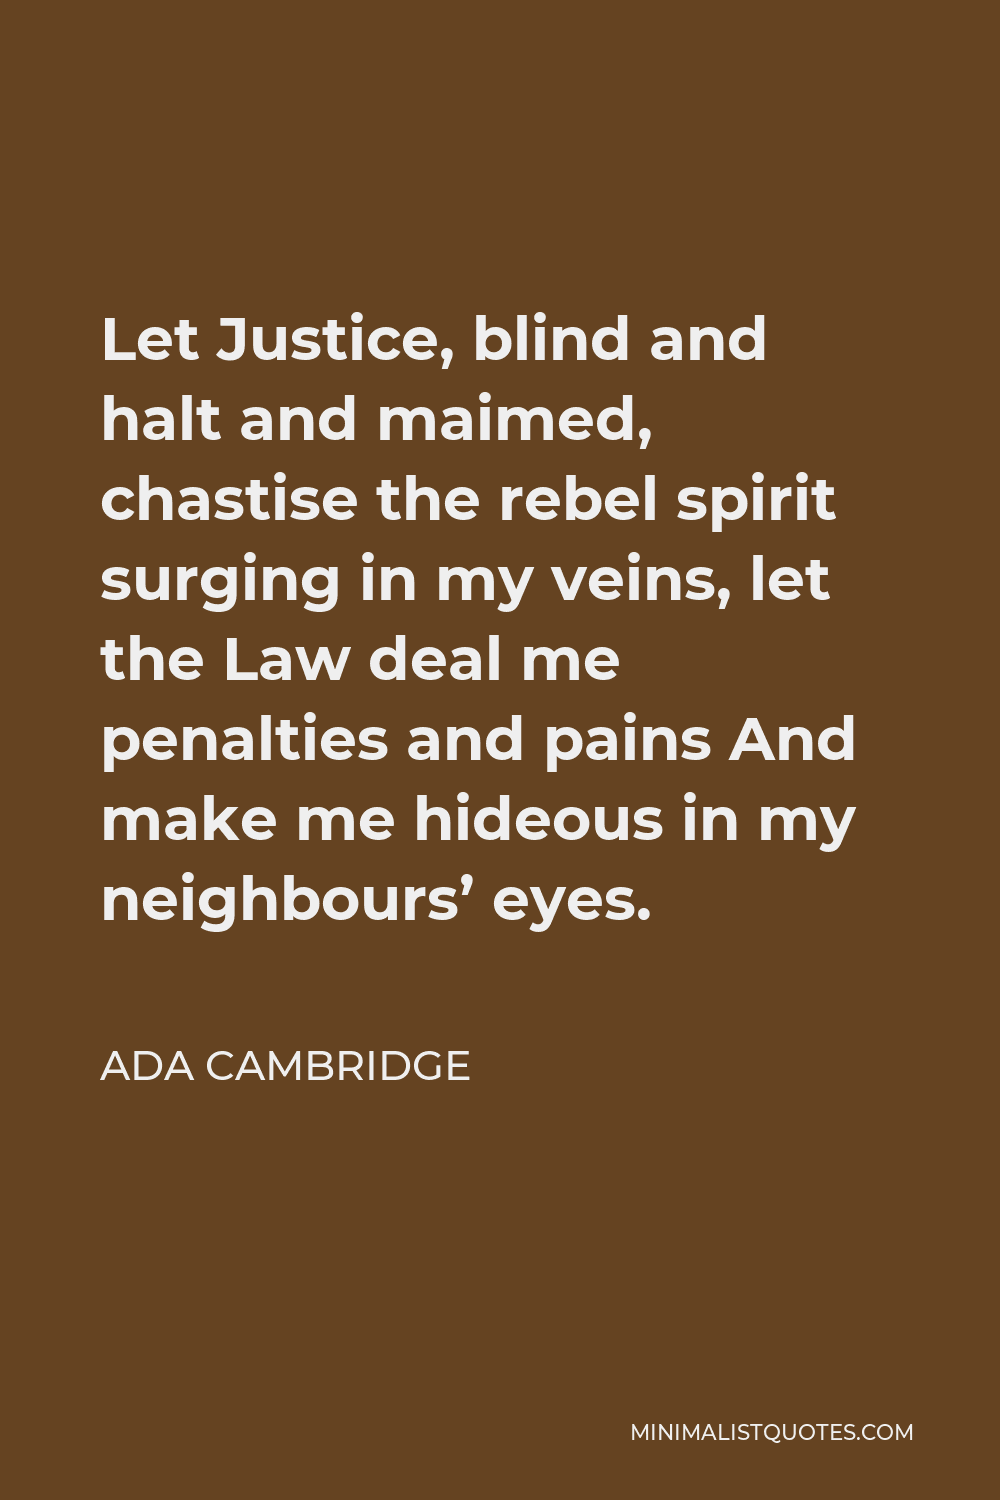 Ada Cambridge Quote - Let Justice, blind and halt and maimed, chastise the rebel spirit surging in my veins, let the Law deal me penalties and pains And make me hideous in my neighbours’ eyes.